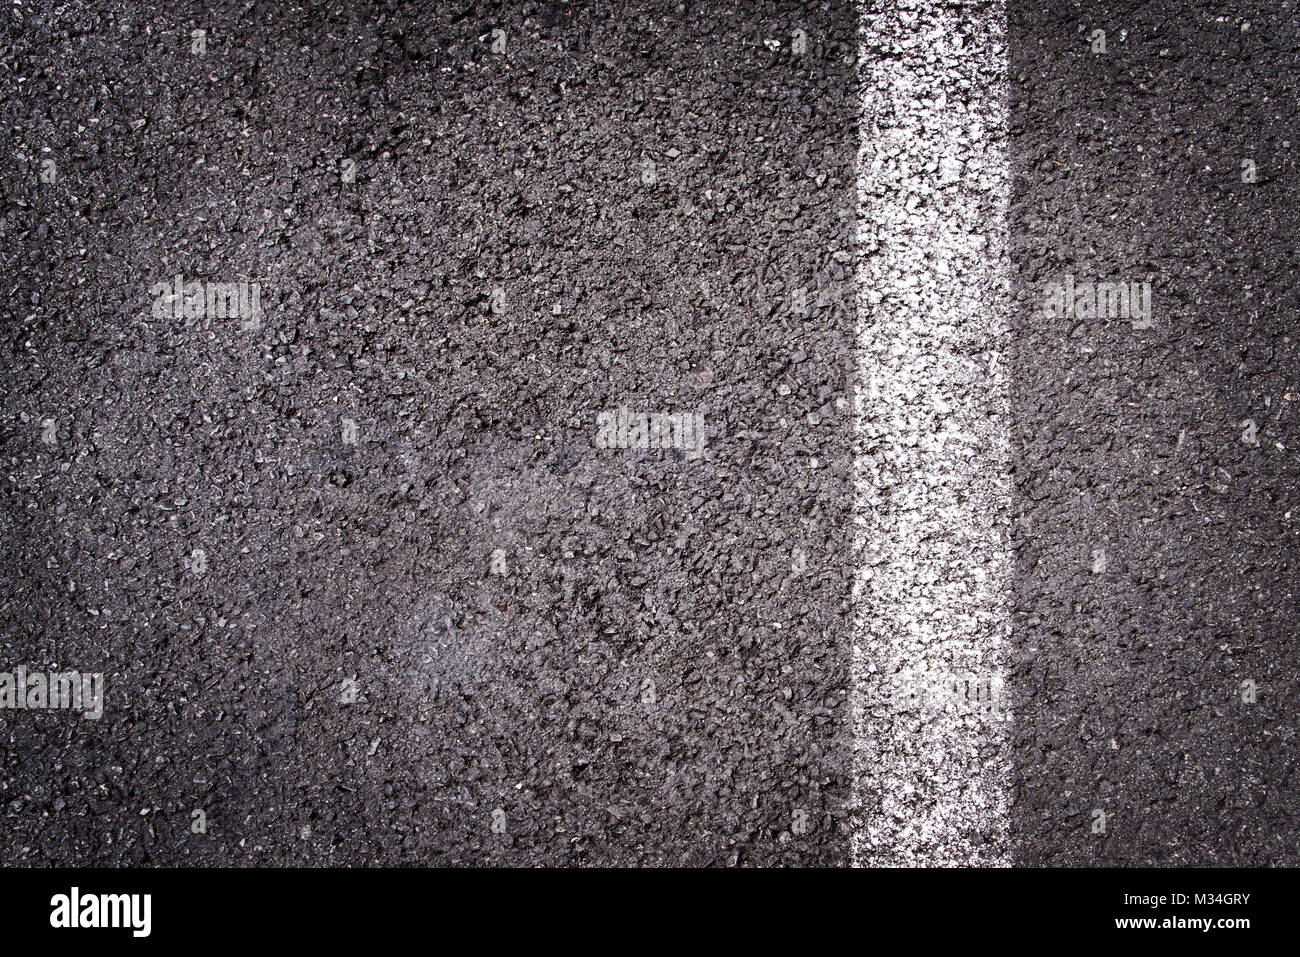 Asphalt road top view with a white line Stock Photo